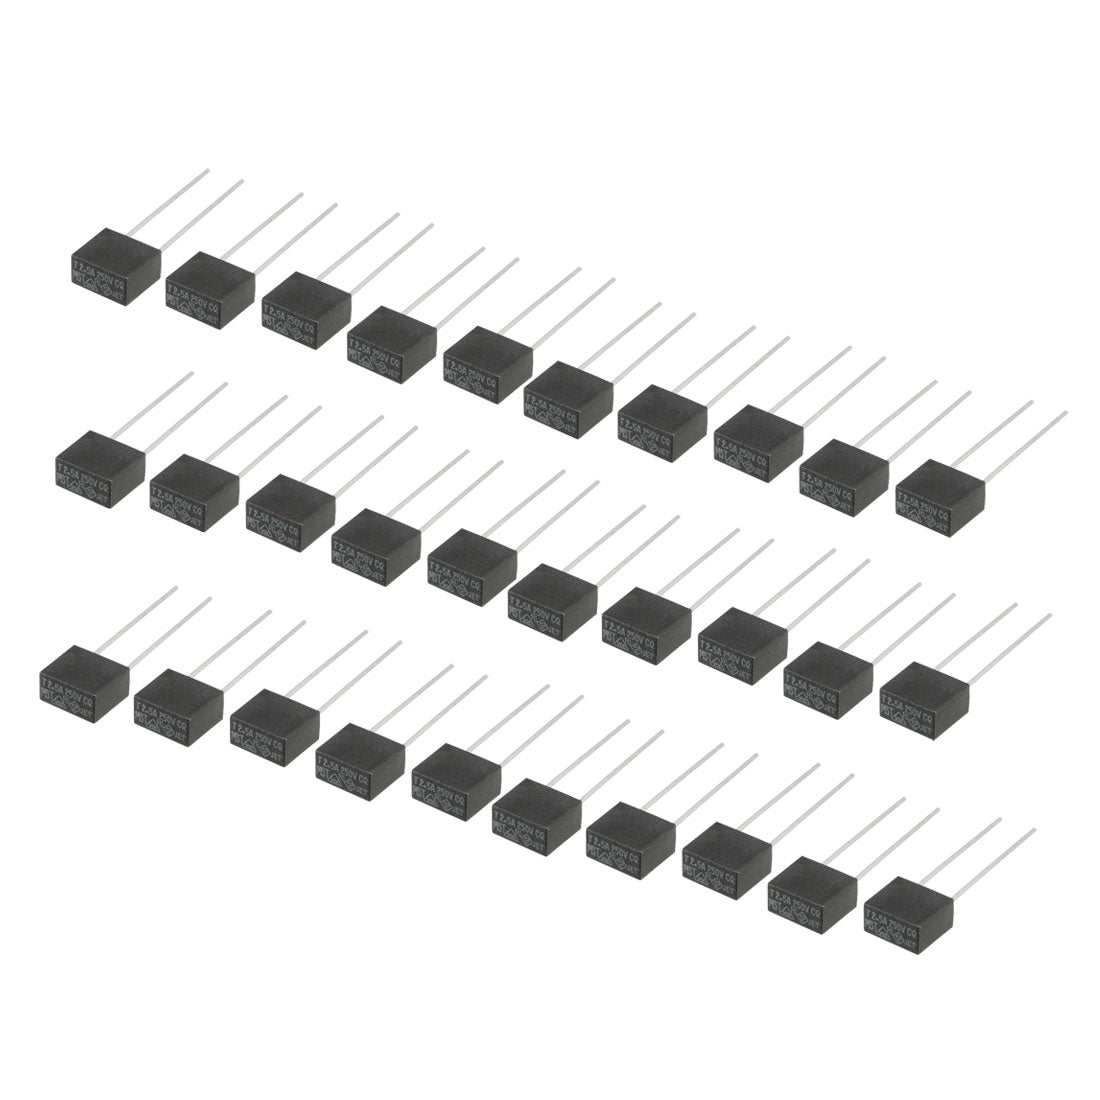 uxcell Uxcell 30Pcs DIP Mounted Miniature Square Slow Blow Micro Fuse T2.5A 2.5A 250V Black